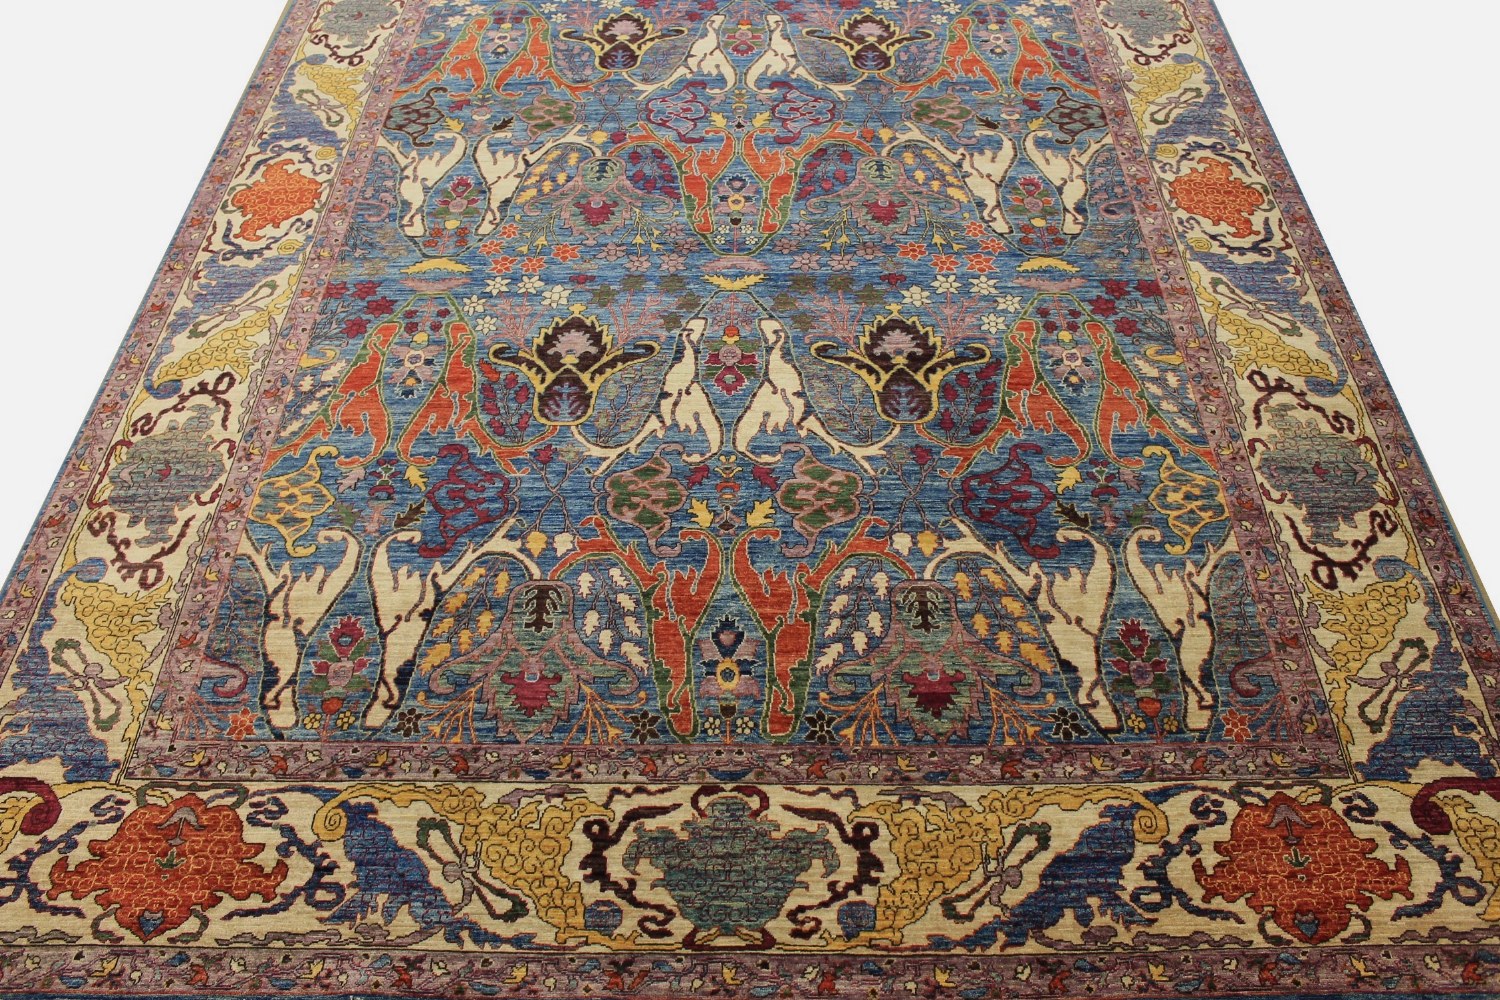 10x14 Antique Revival Hand Knotted Wool Area Rug - MR024991